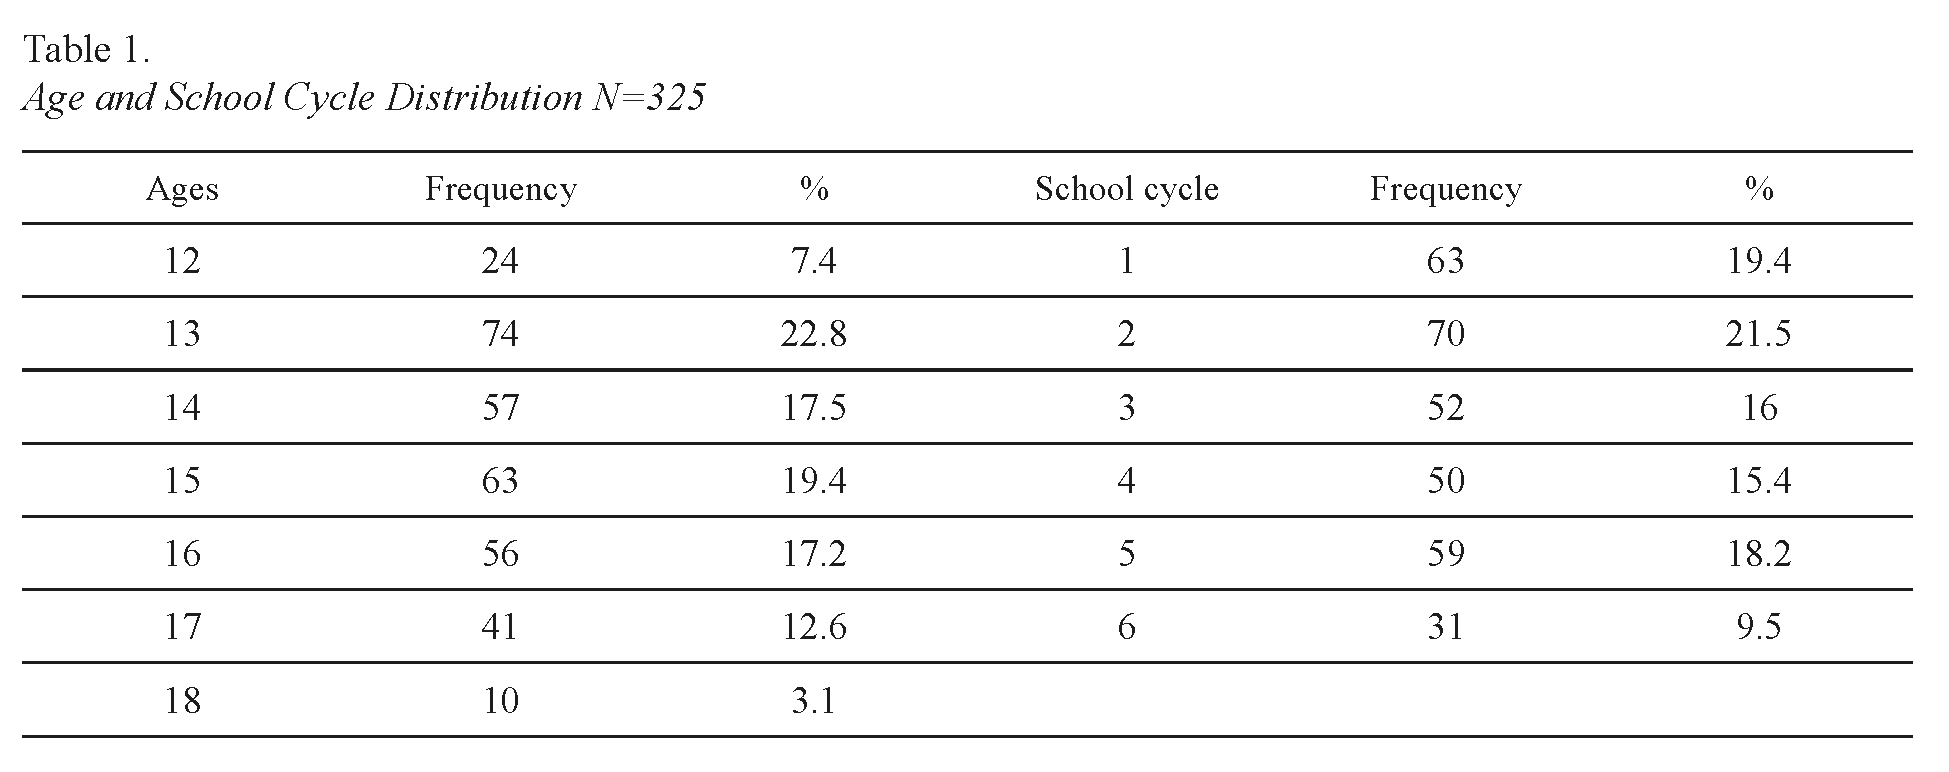 Age and School Cycle Distribution